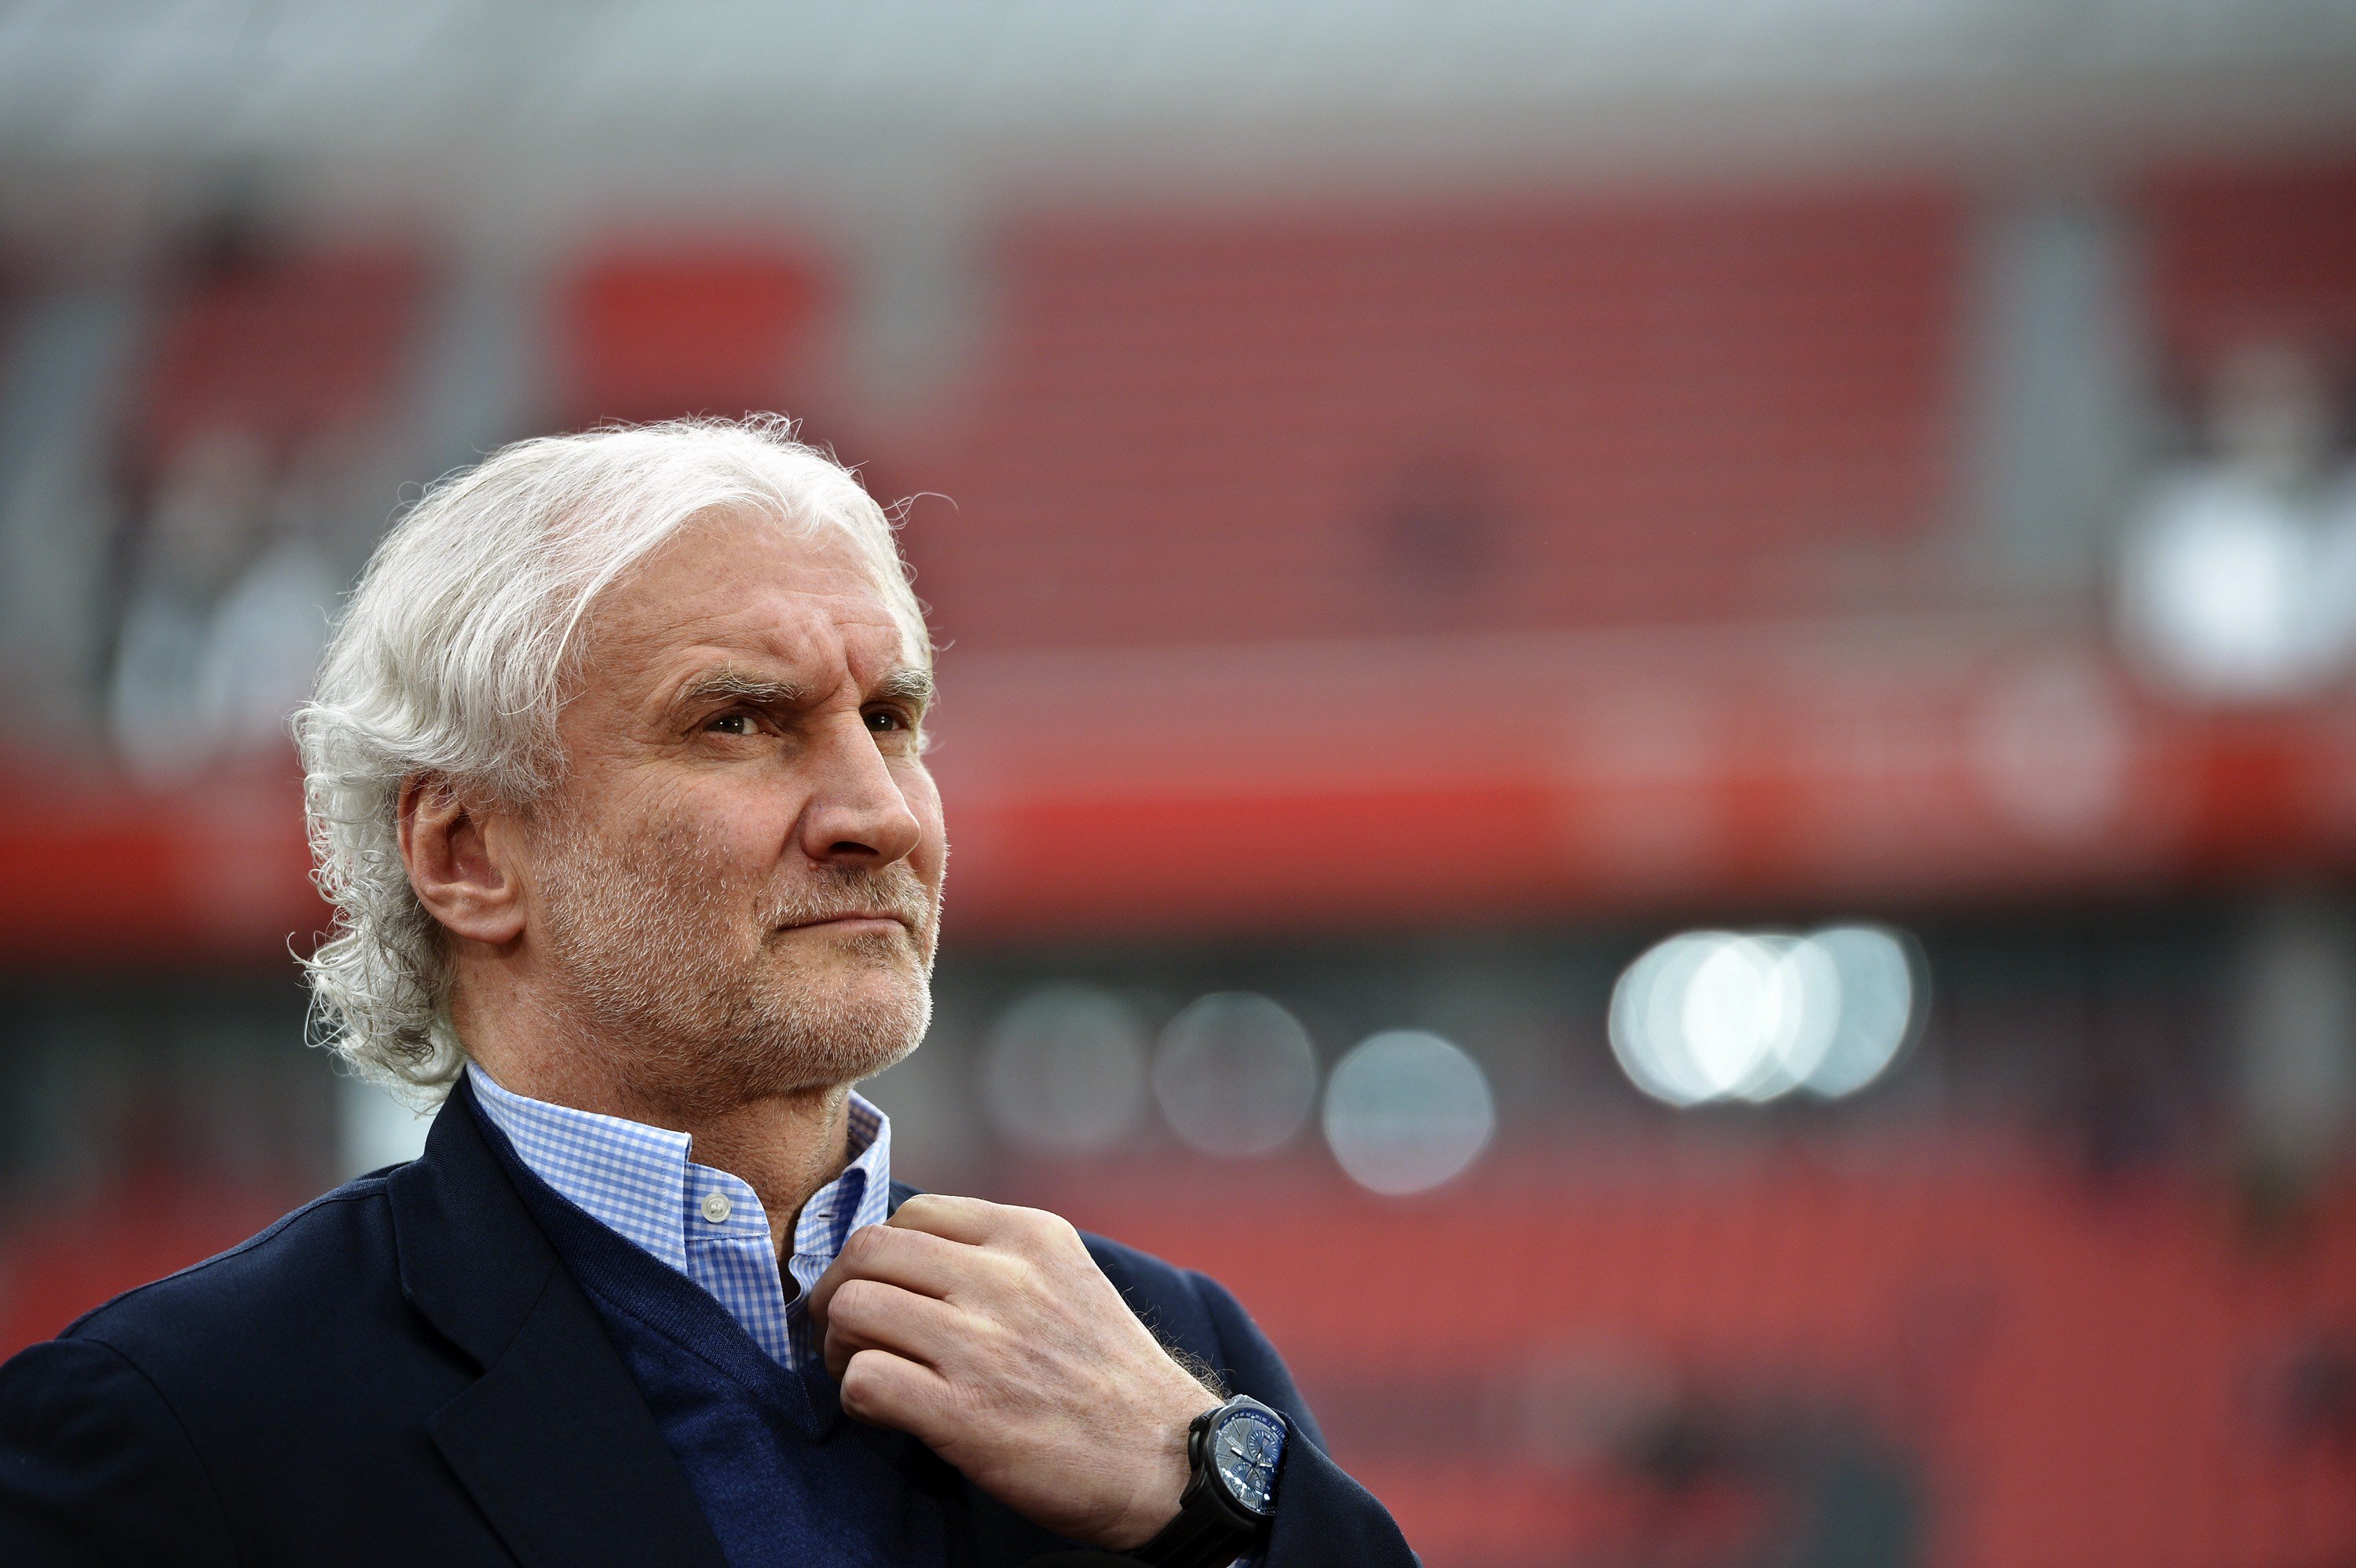 German soccer player and coach Rudi Voller 